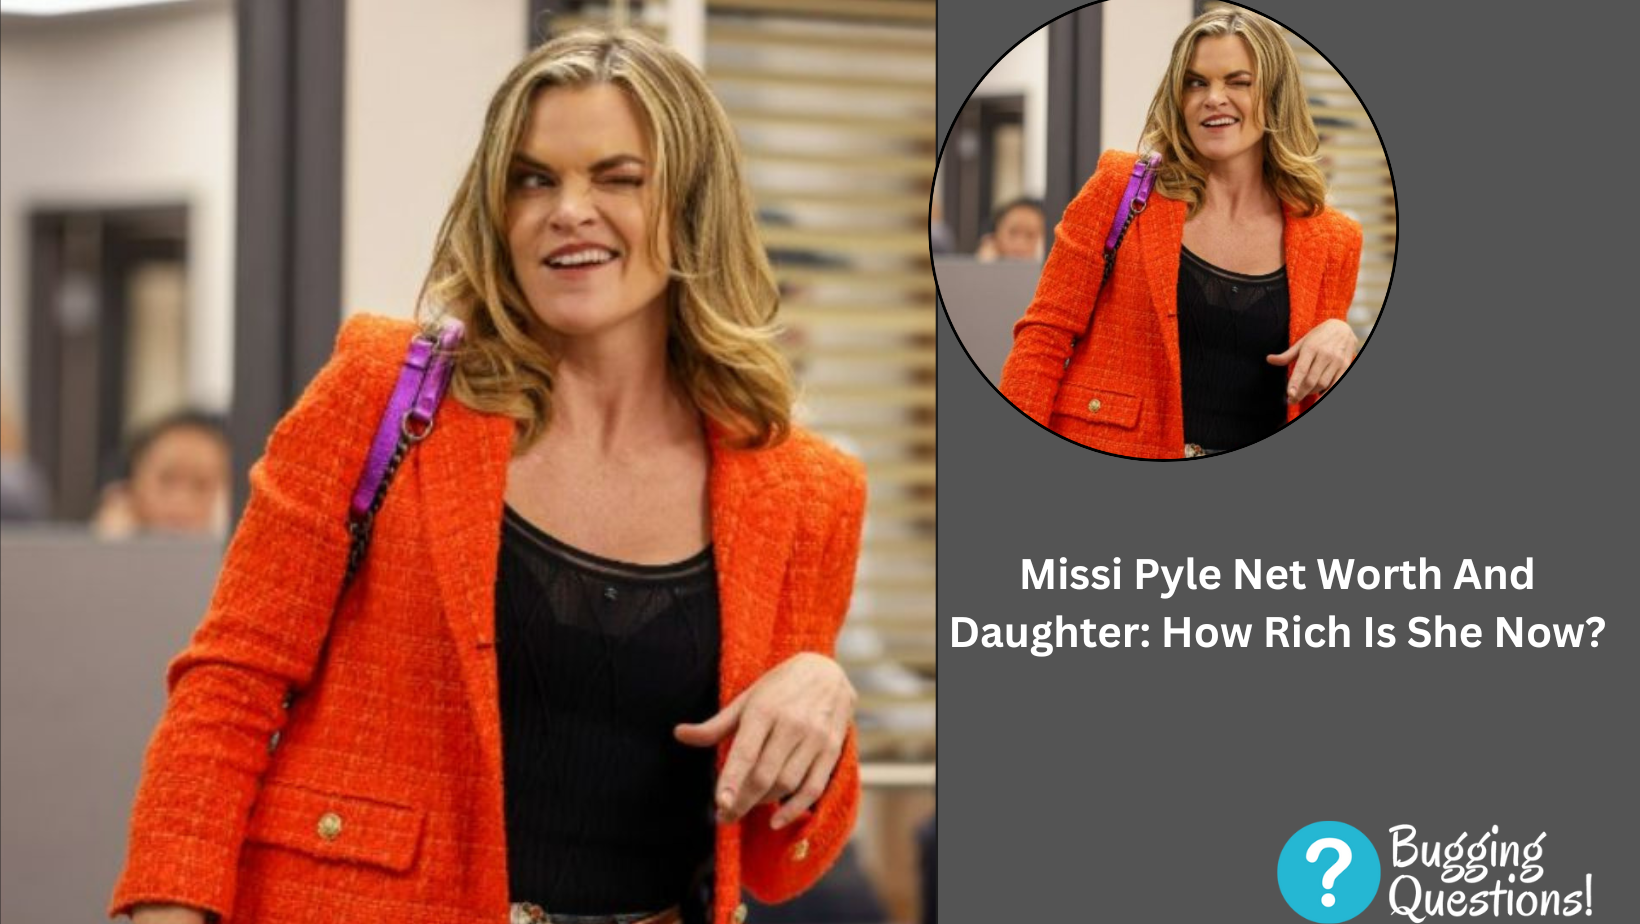 Missi Pyle Net Worth And Daughter: How Rich Is She Now?